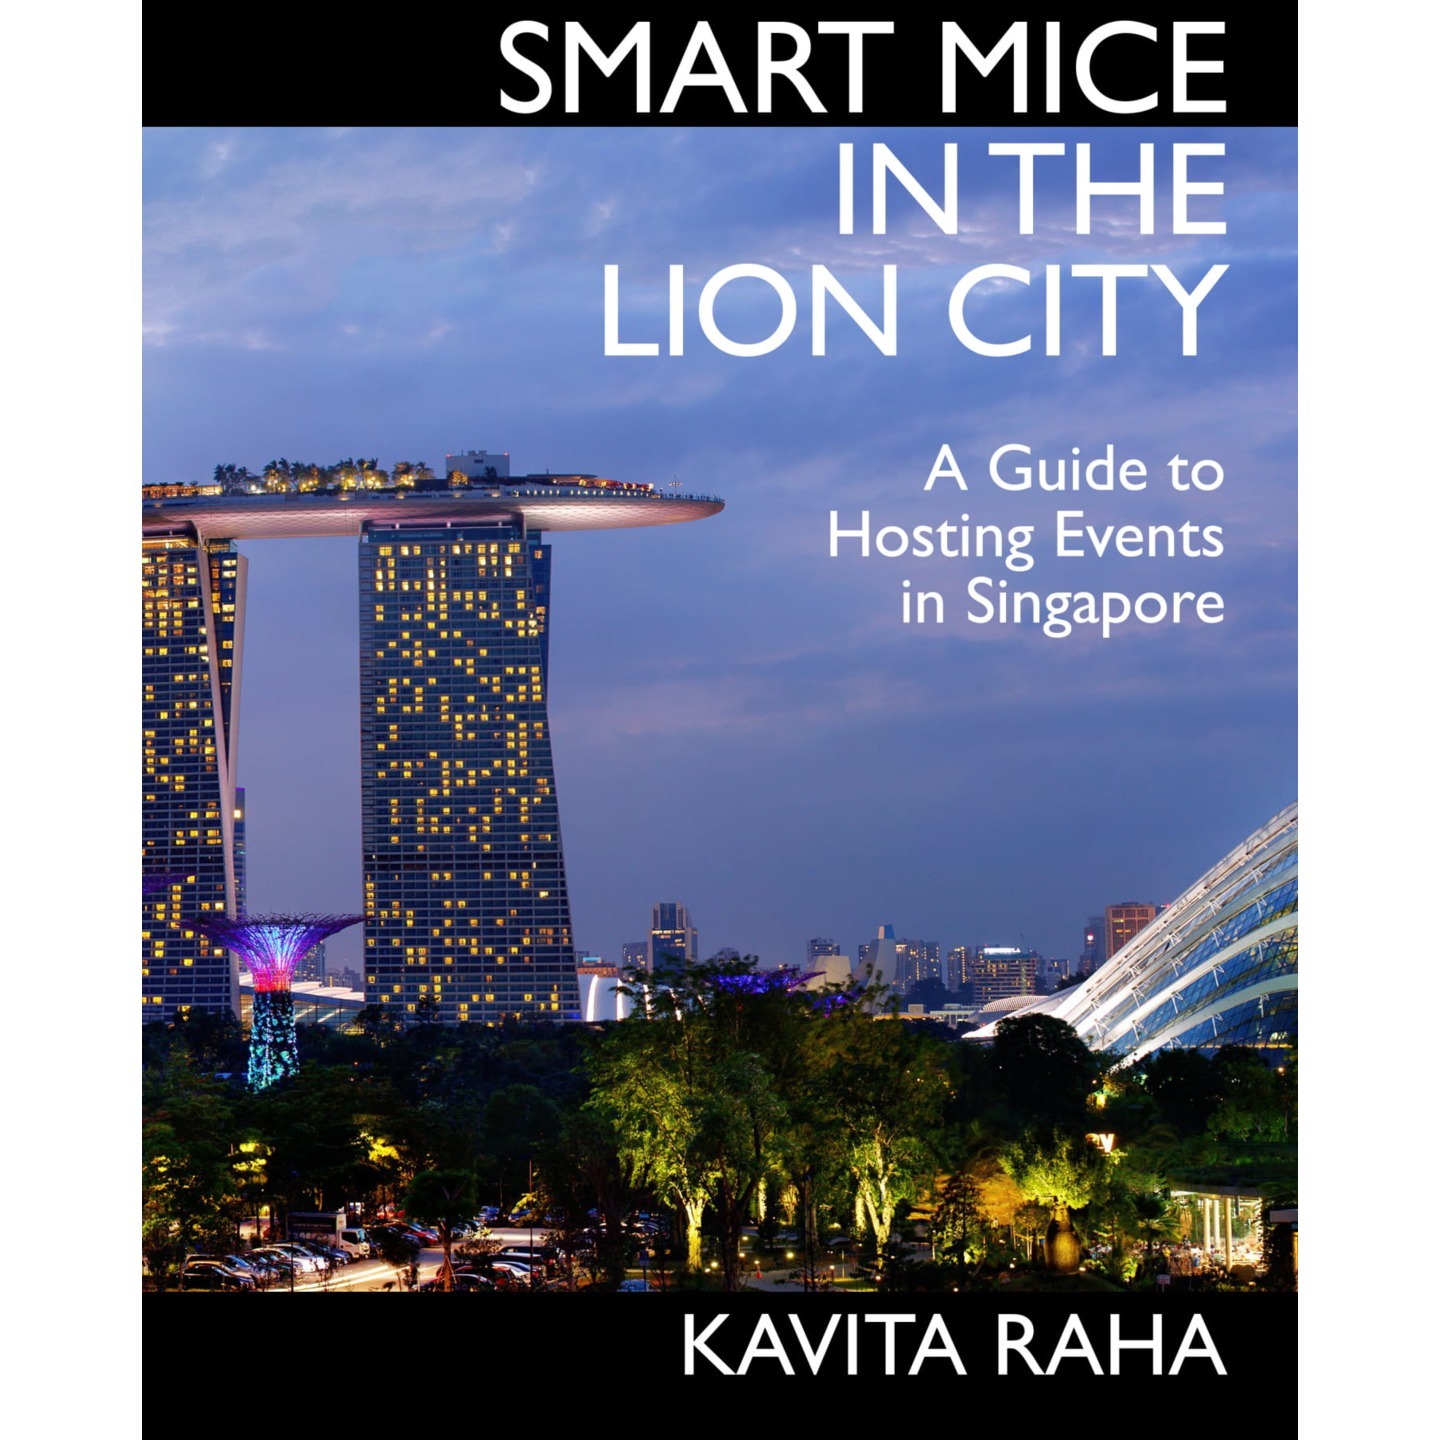 SMART MICE IN THE LION CITY